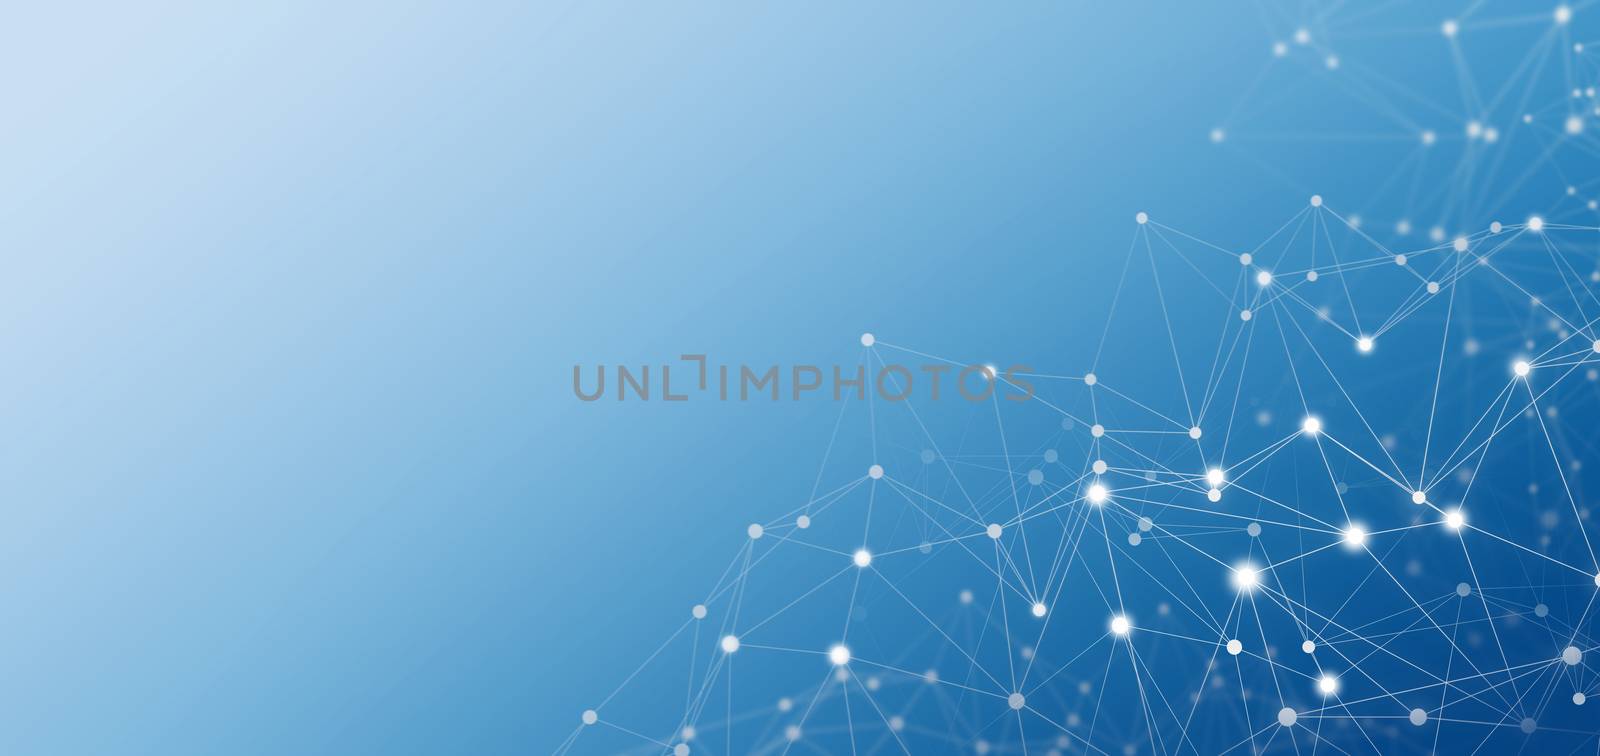 Abstract global network connection background illustration by Myimagine